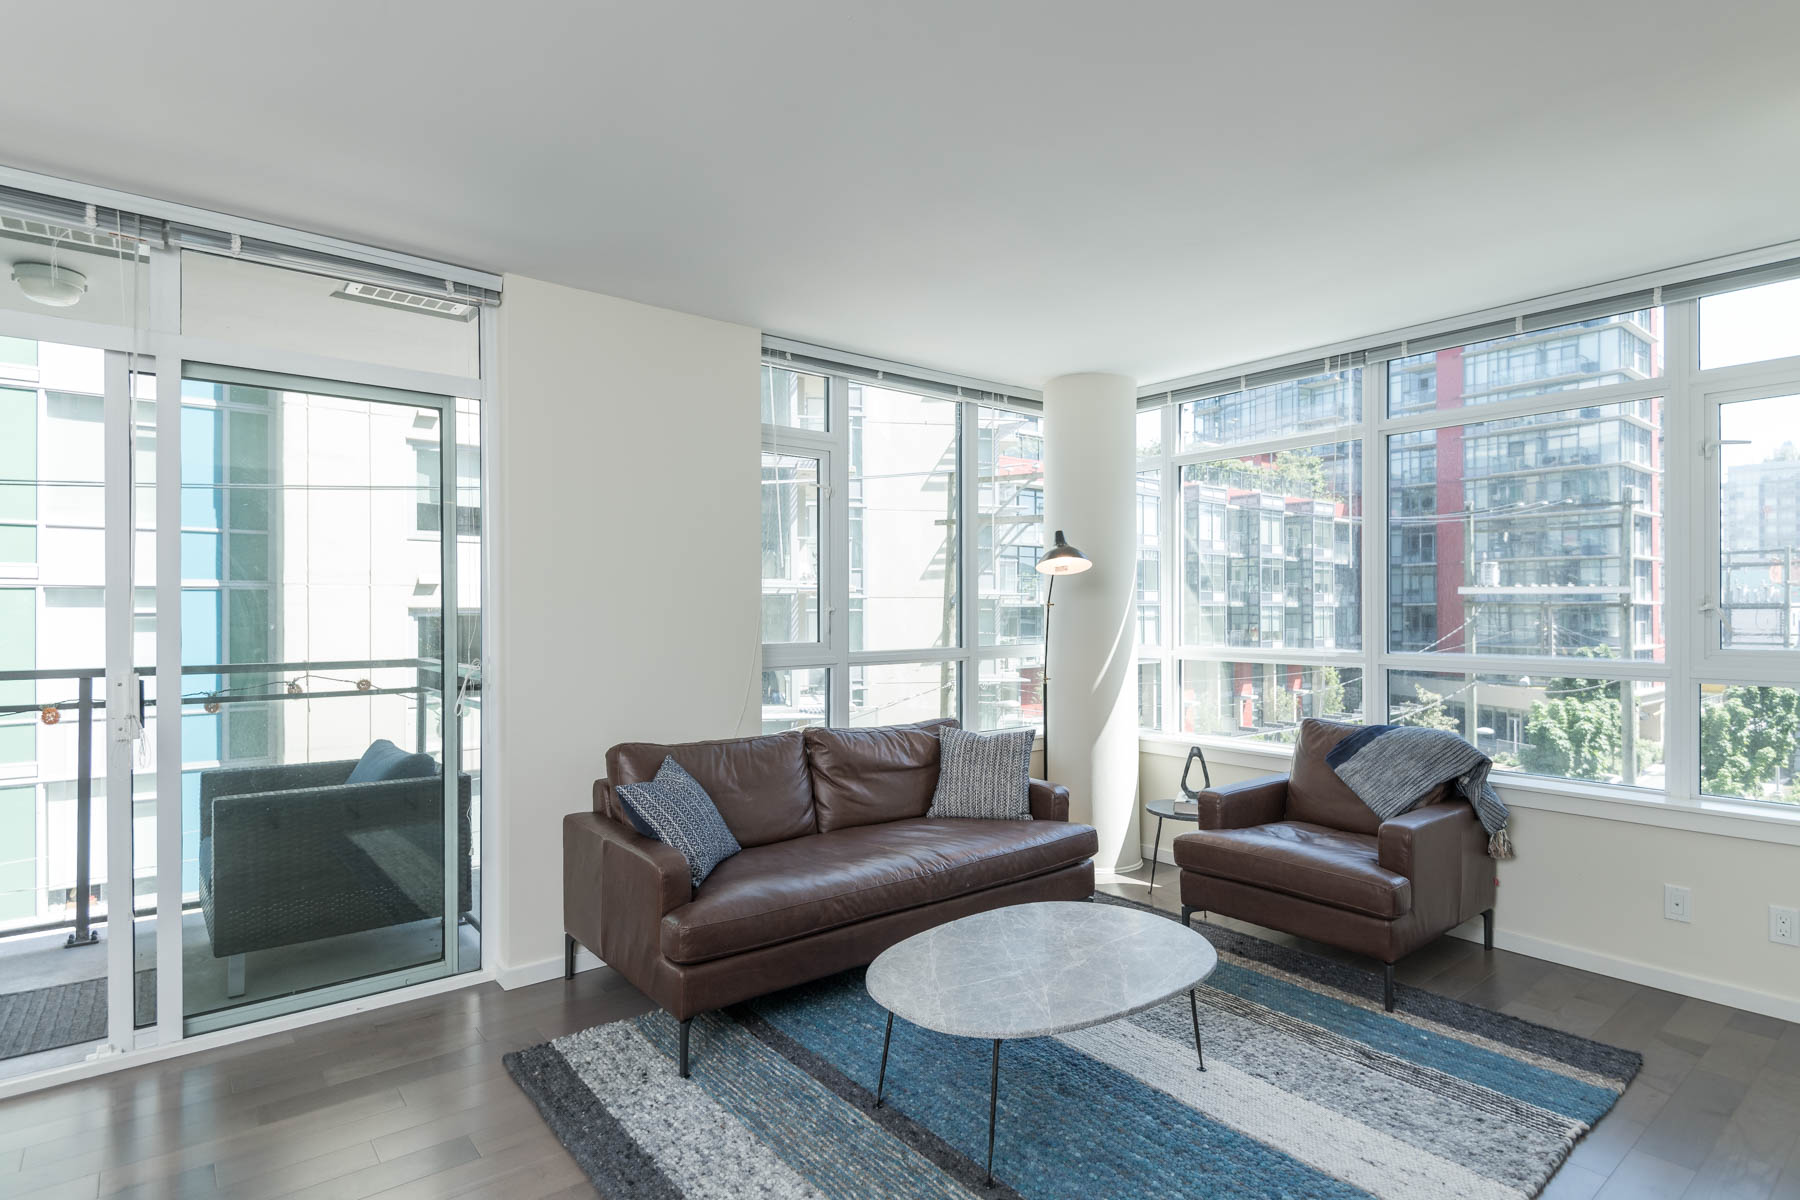 Furnished living area inside Vancouver rental condo with view.